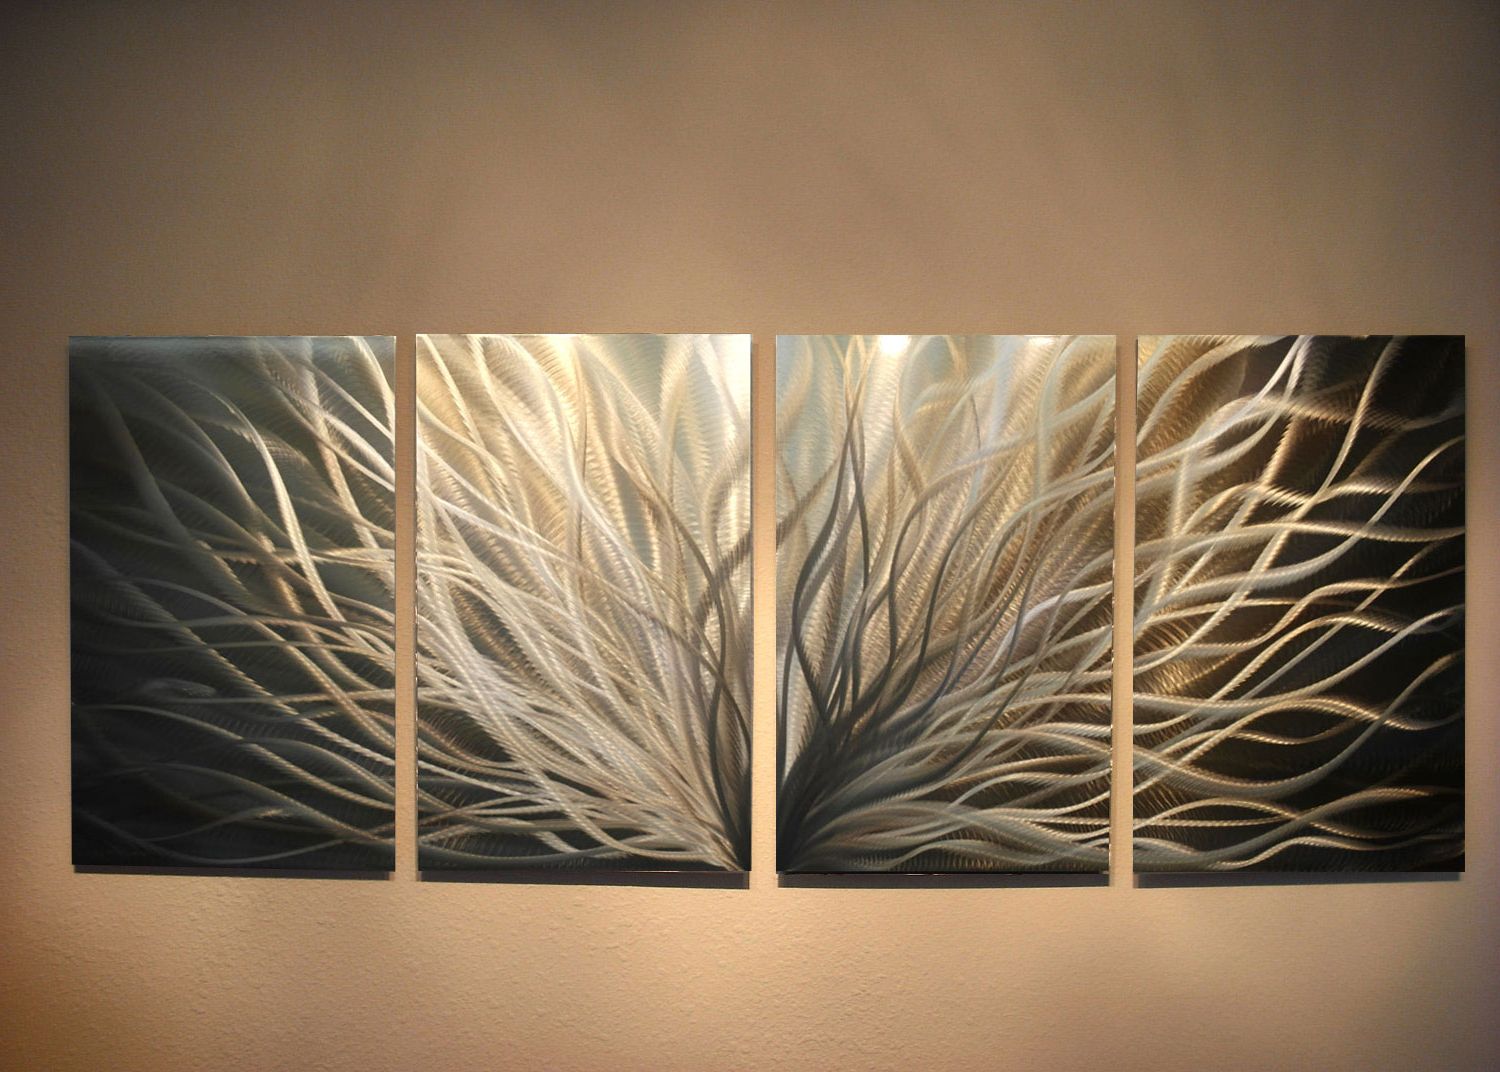 Abstract Metal Wall Art  Radiance Gold Silver  Contemporary Modern For Most Current Legion Metal Wall Art (View 9 of 15)